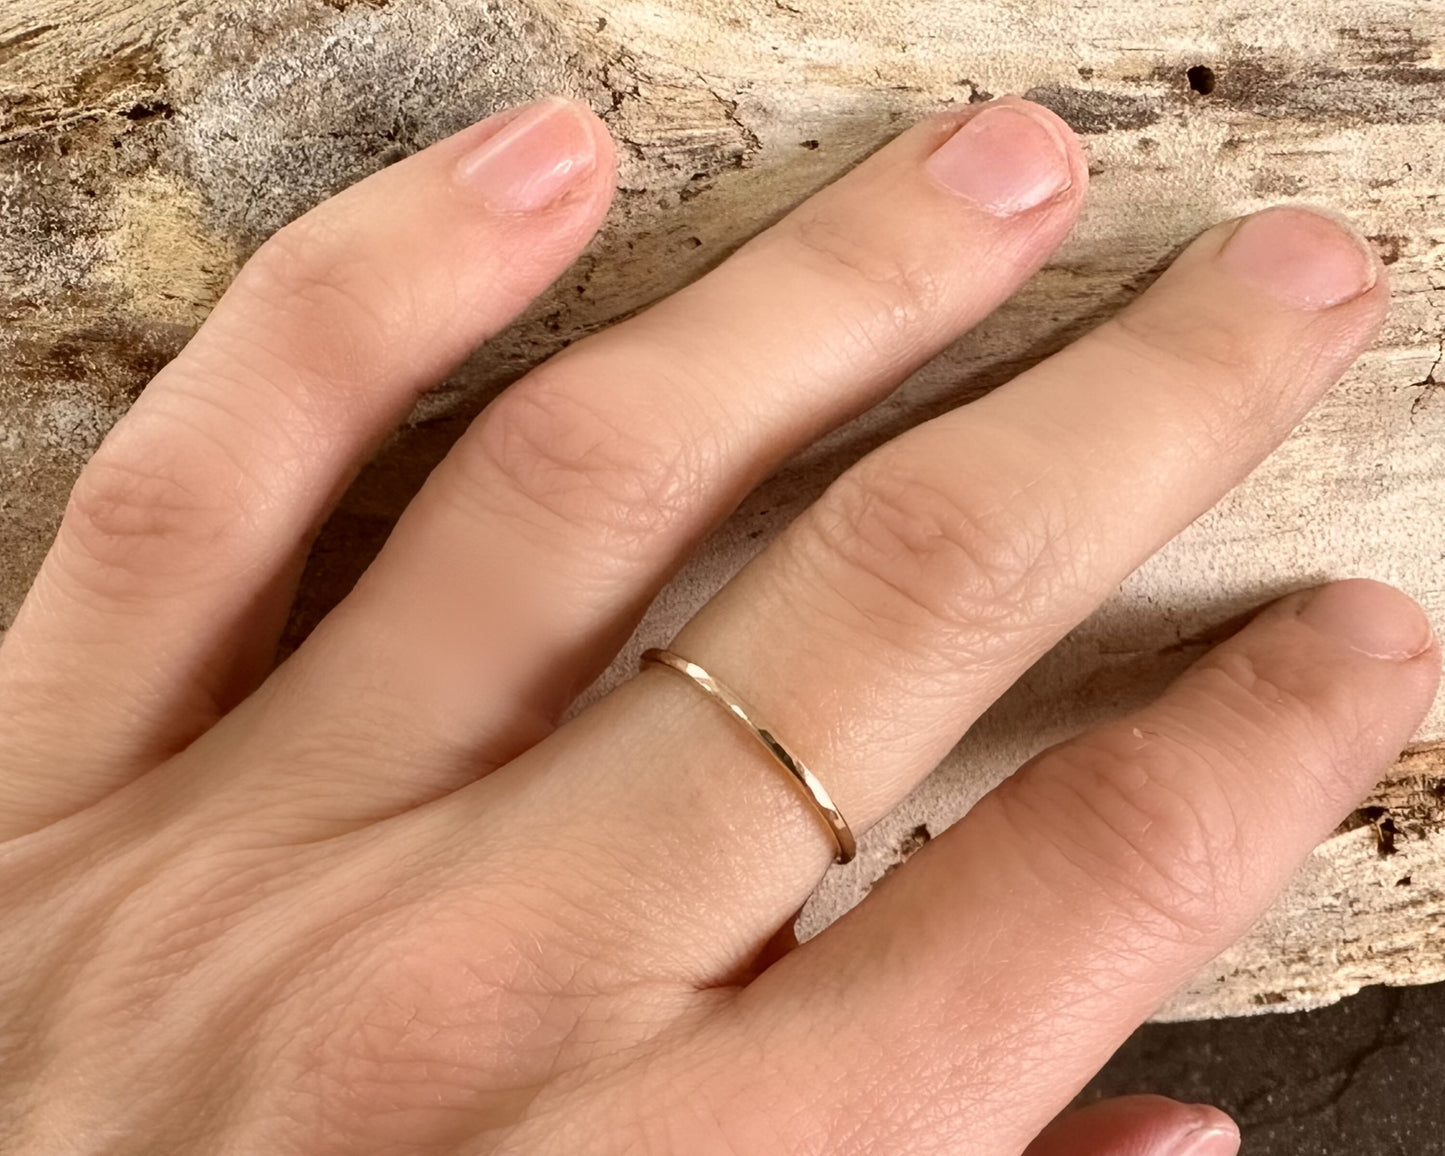 Skinny 1.2mm 9ct Gold Ring, Facet Hammered Effect Minimalist Ring Band, Hadmade Gold Stackable Ring, Wedding Ring